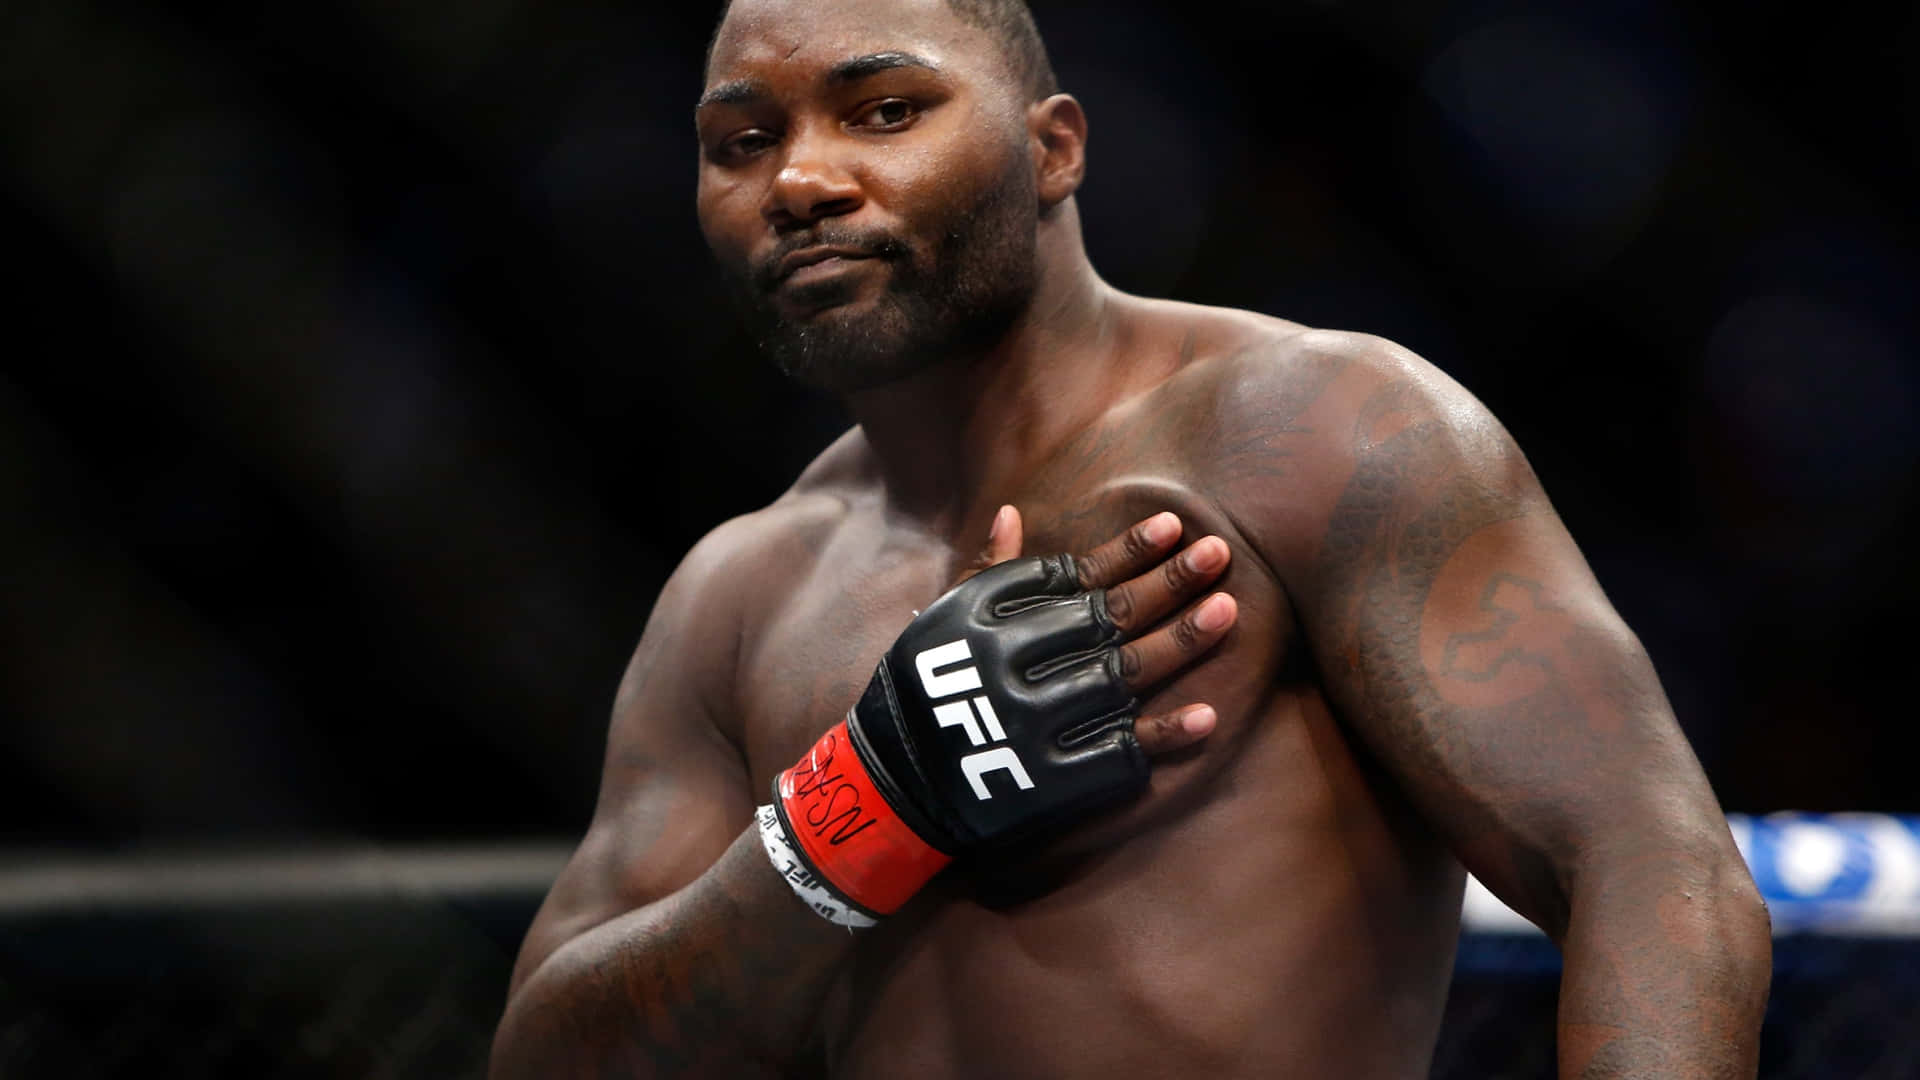 Anthony Johnson First Round Knockout Against Glover Teixeira 2016 Wallpaper